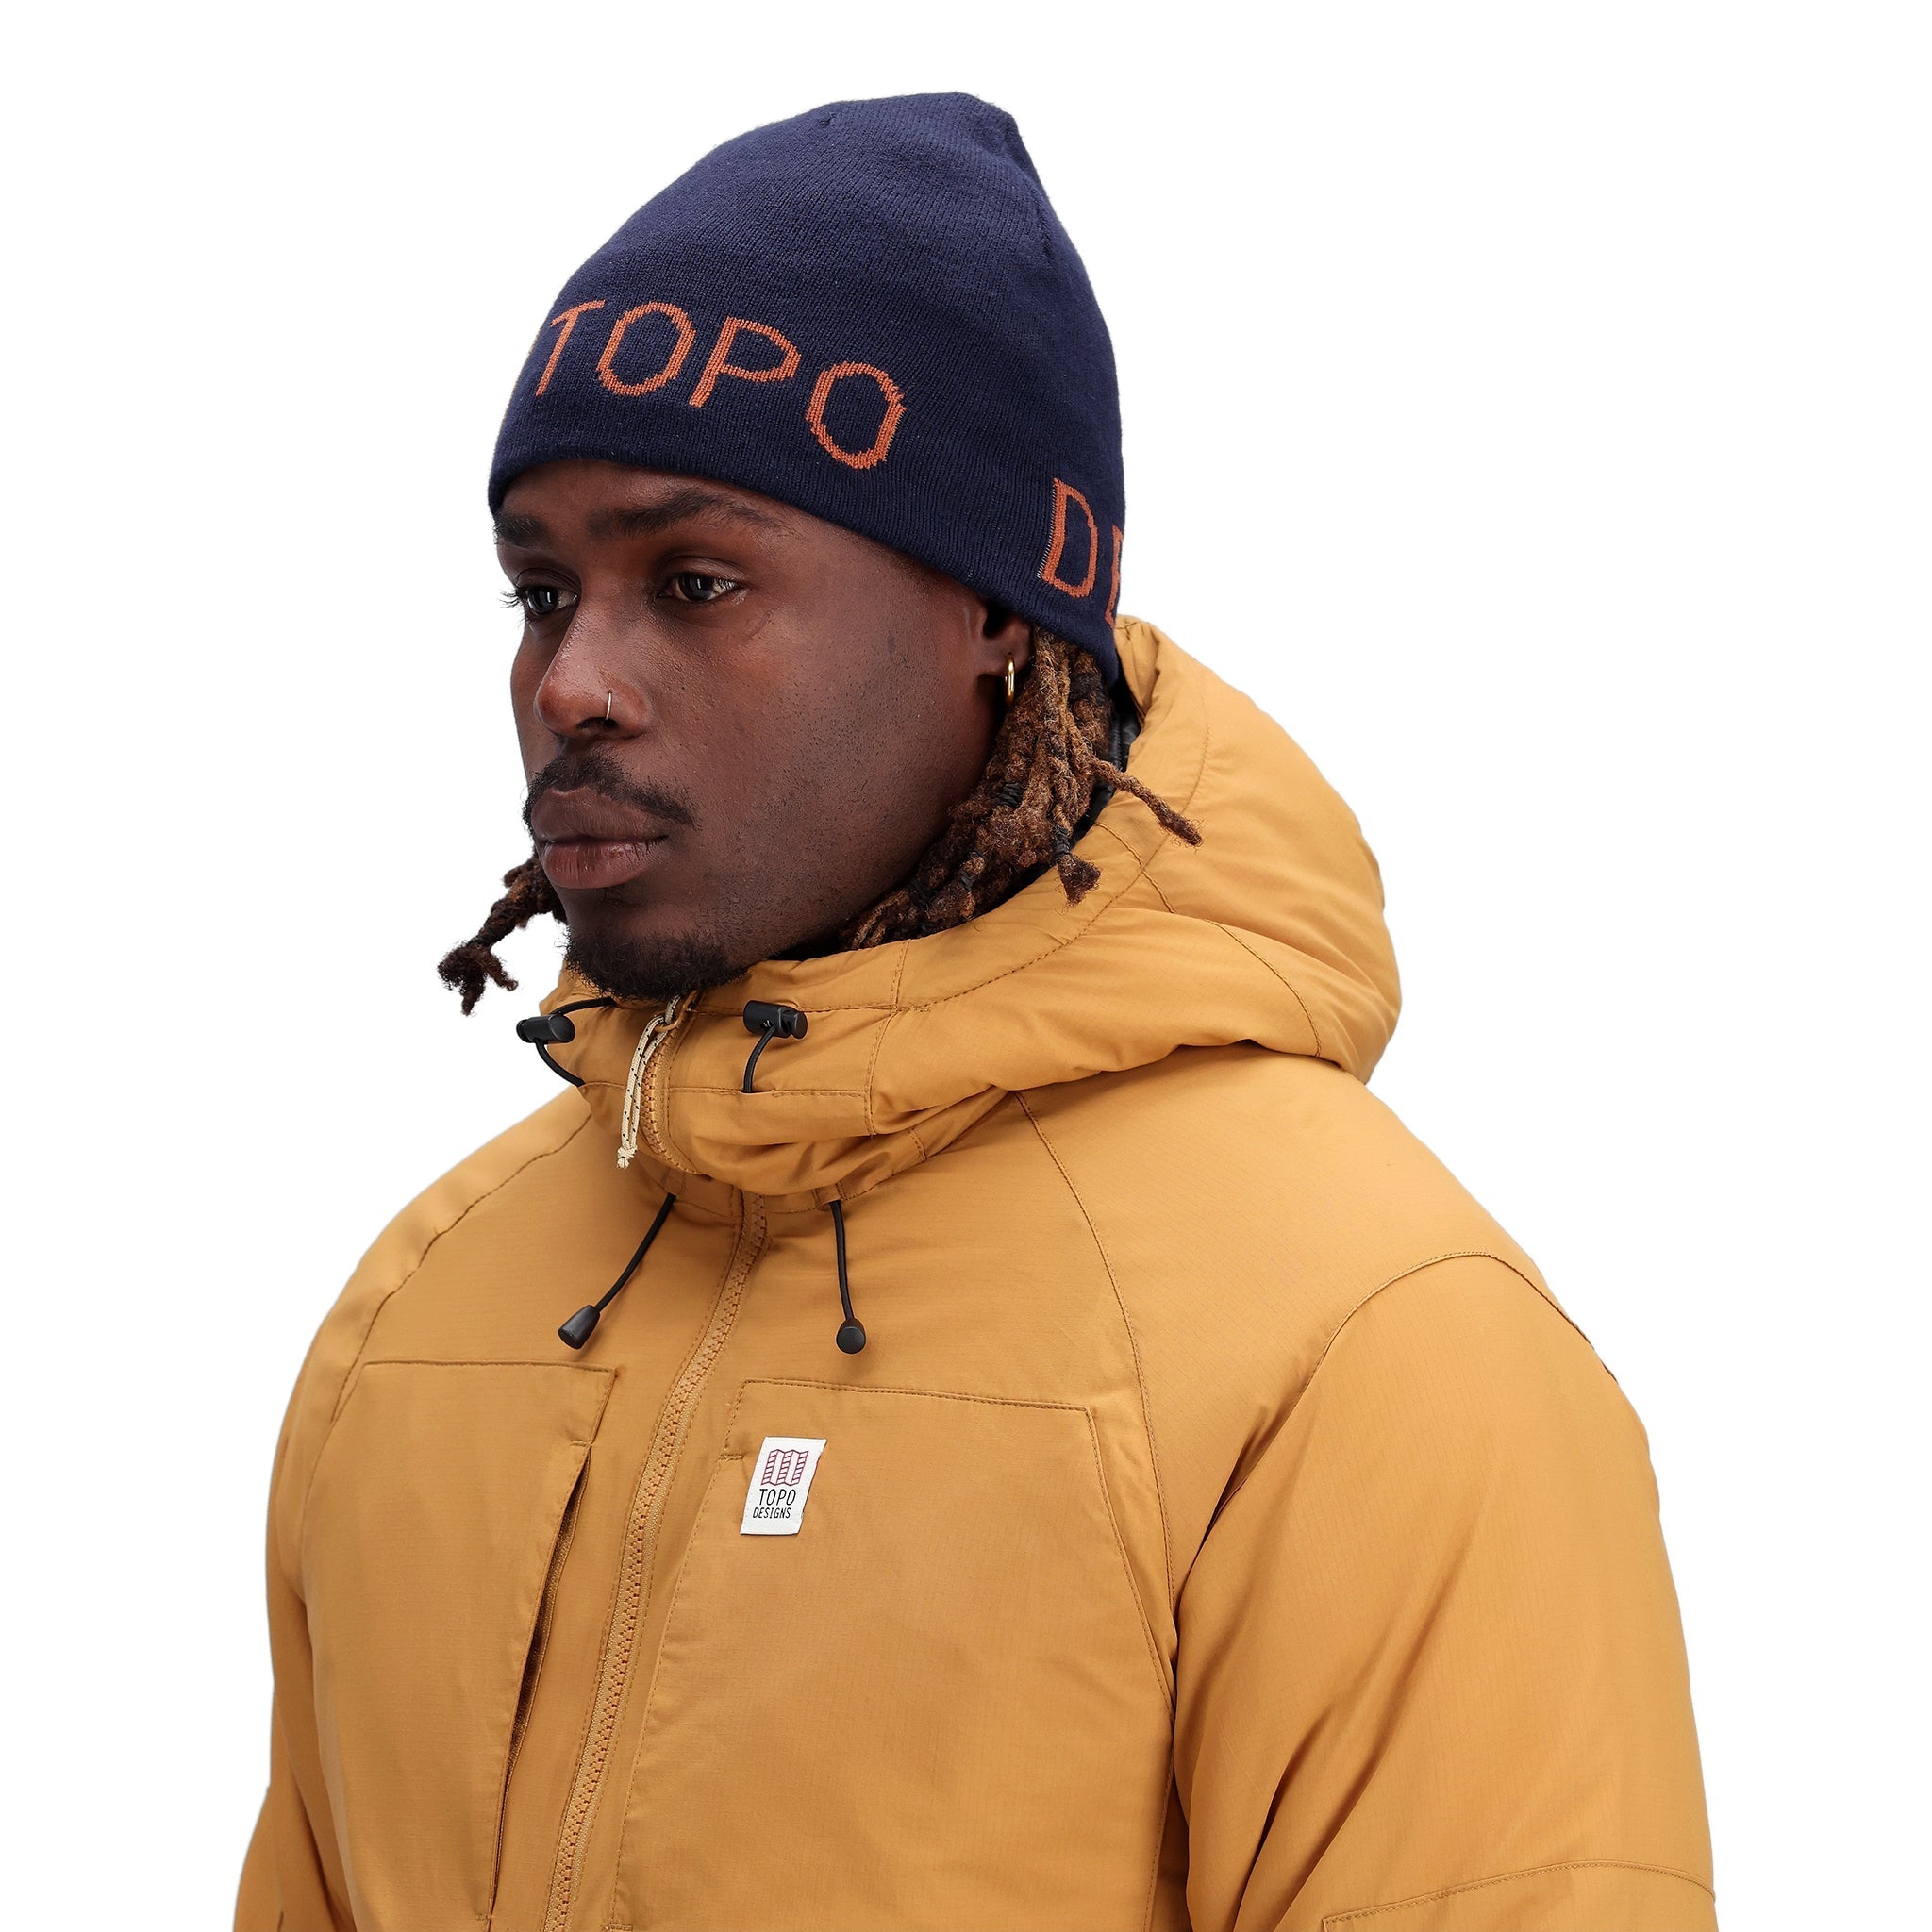 Topo Designs Slim Fitted Beanie "Forest / Pond Blue"